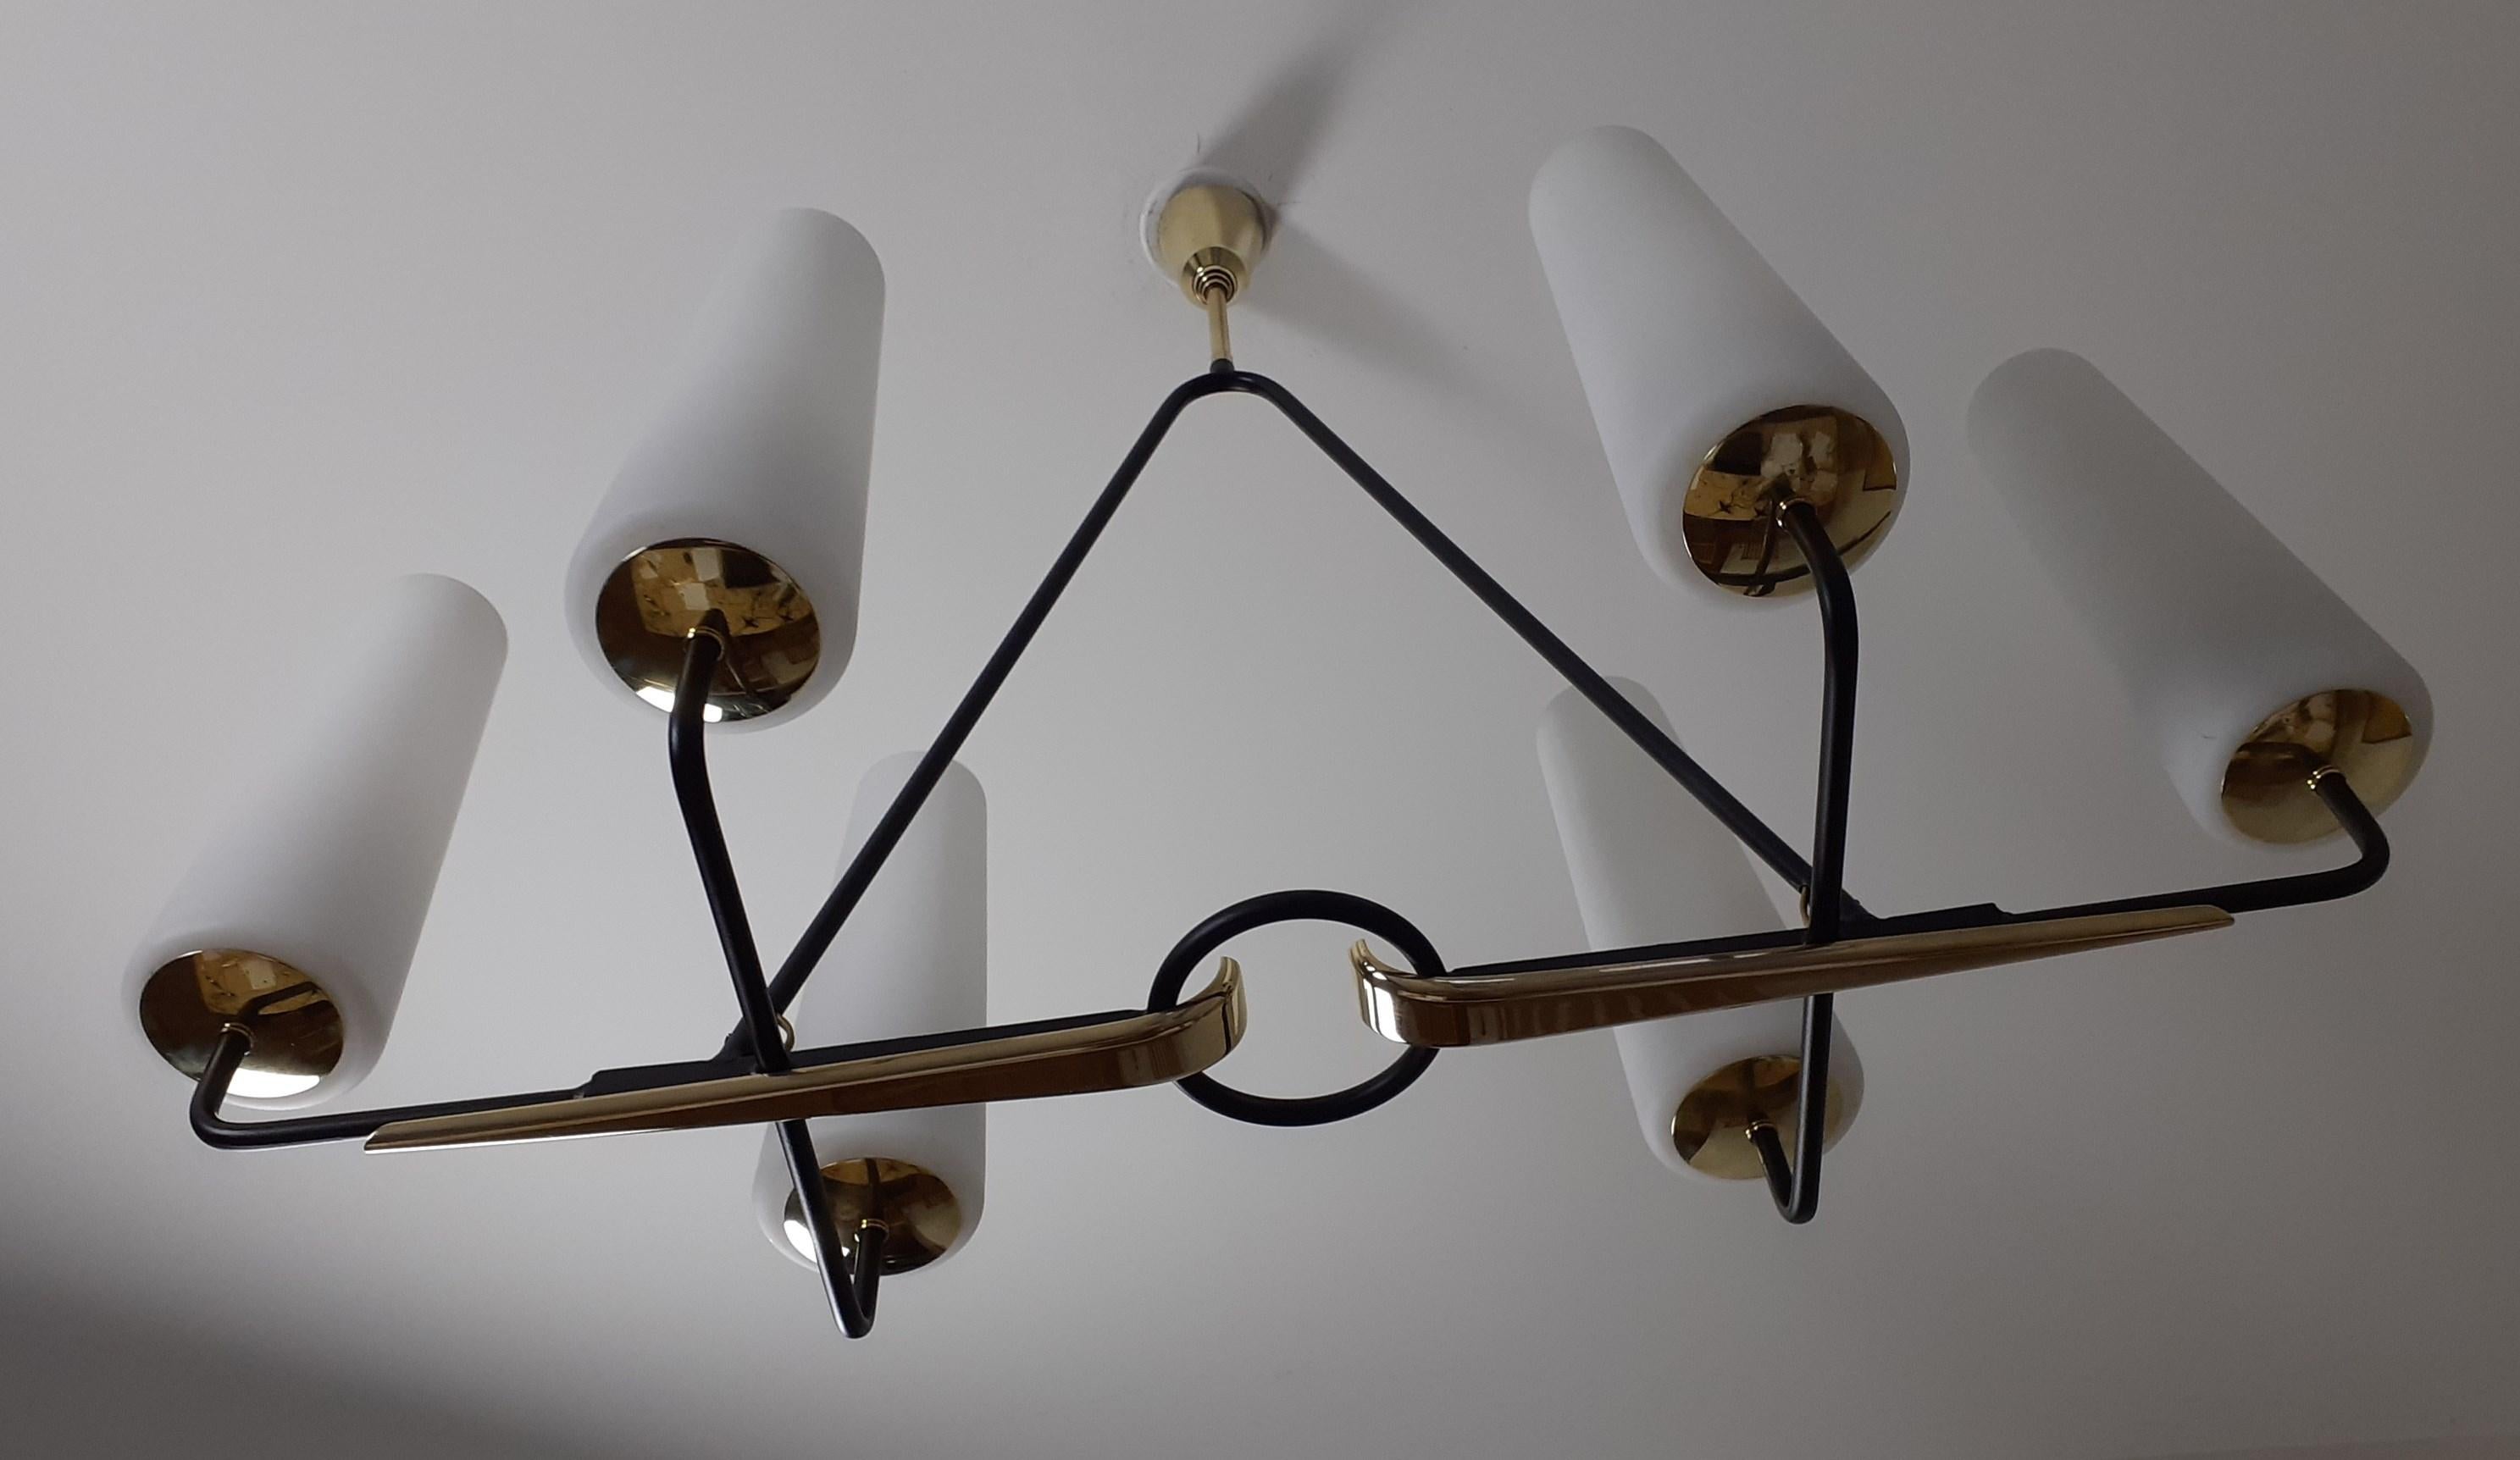 1950 Chandelier Six Arms of Lights Maison Lunel 6